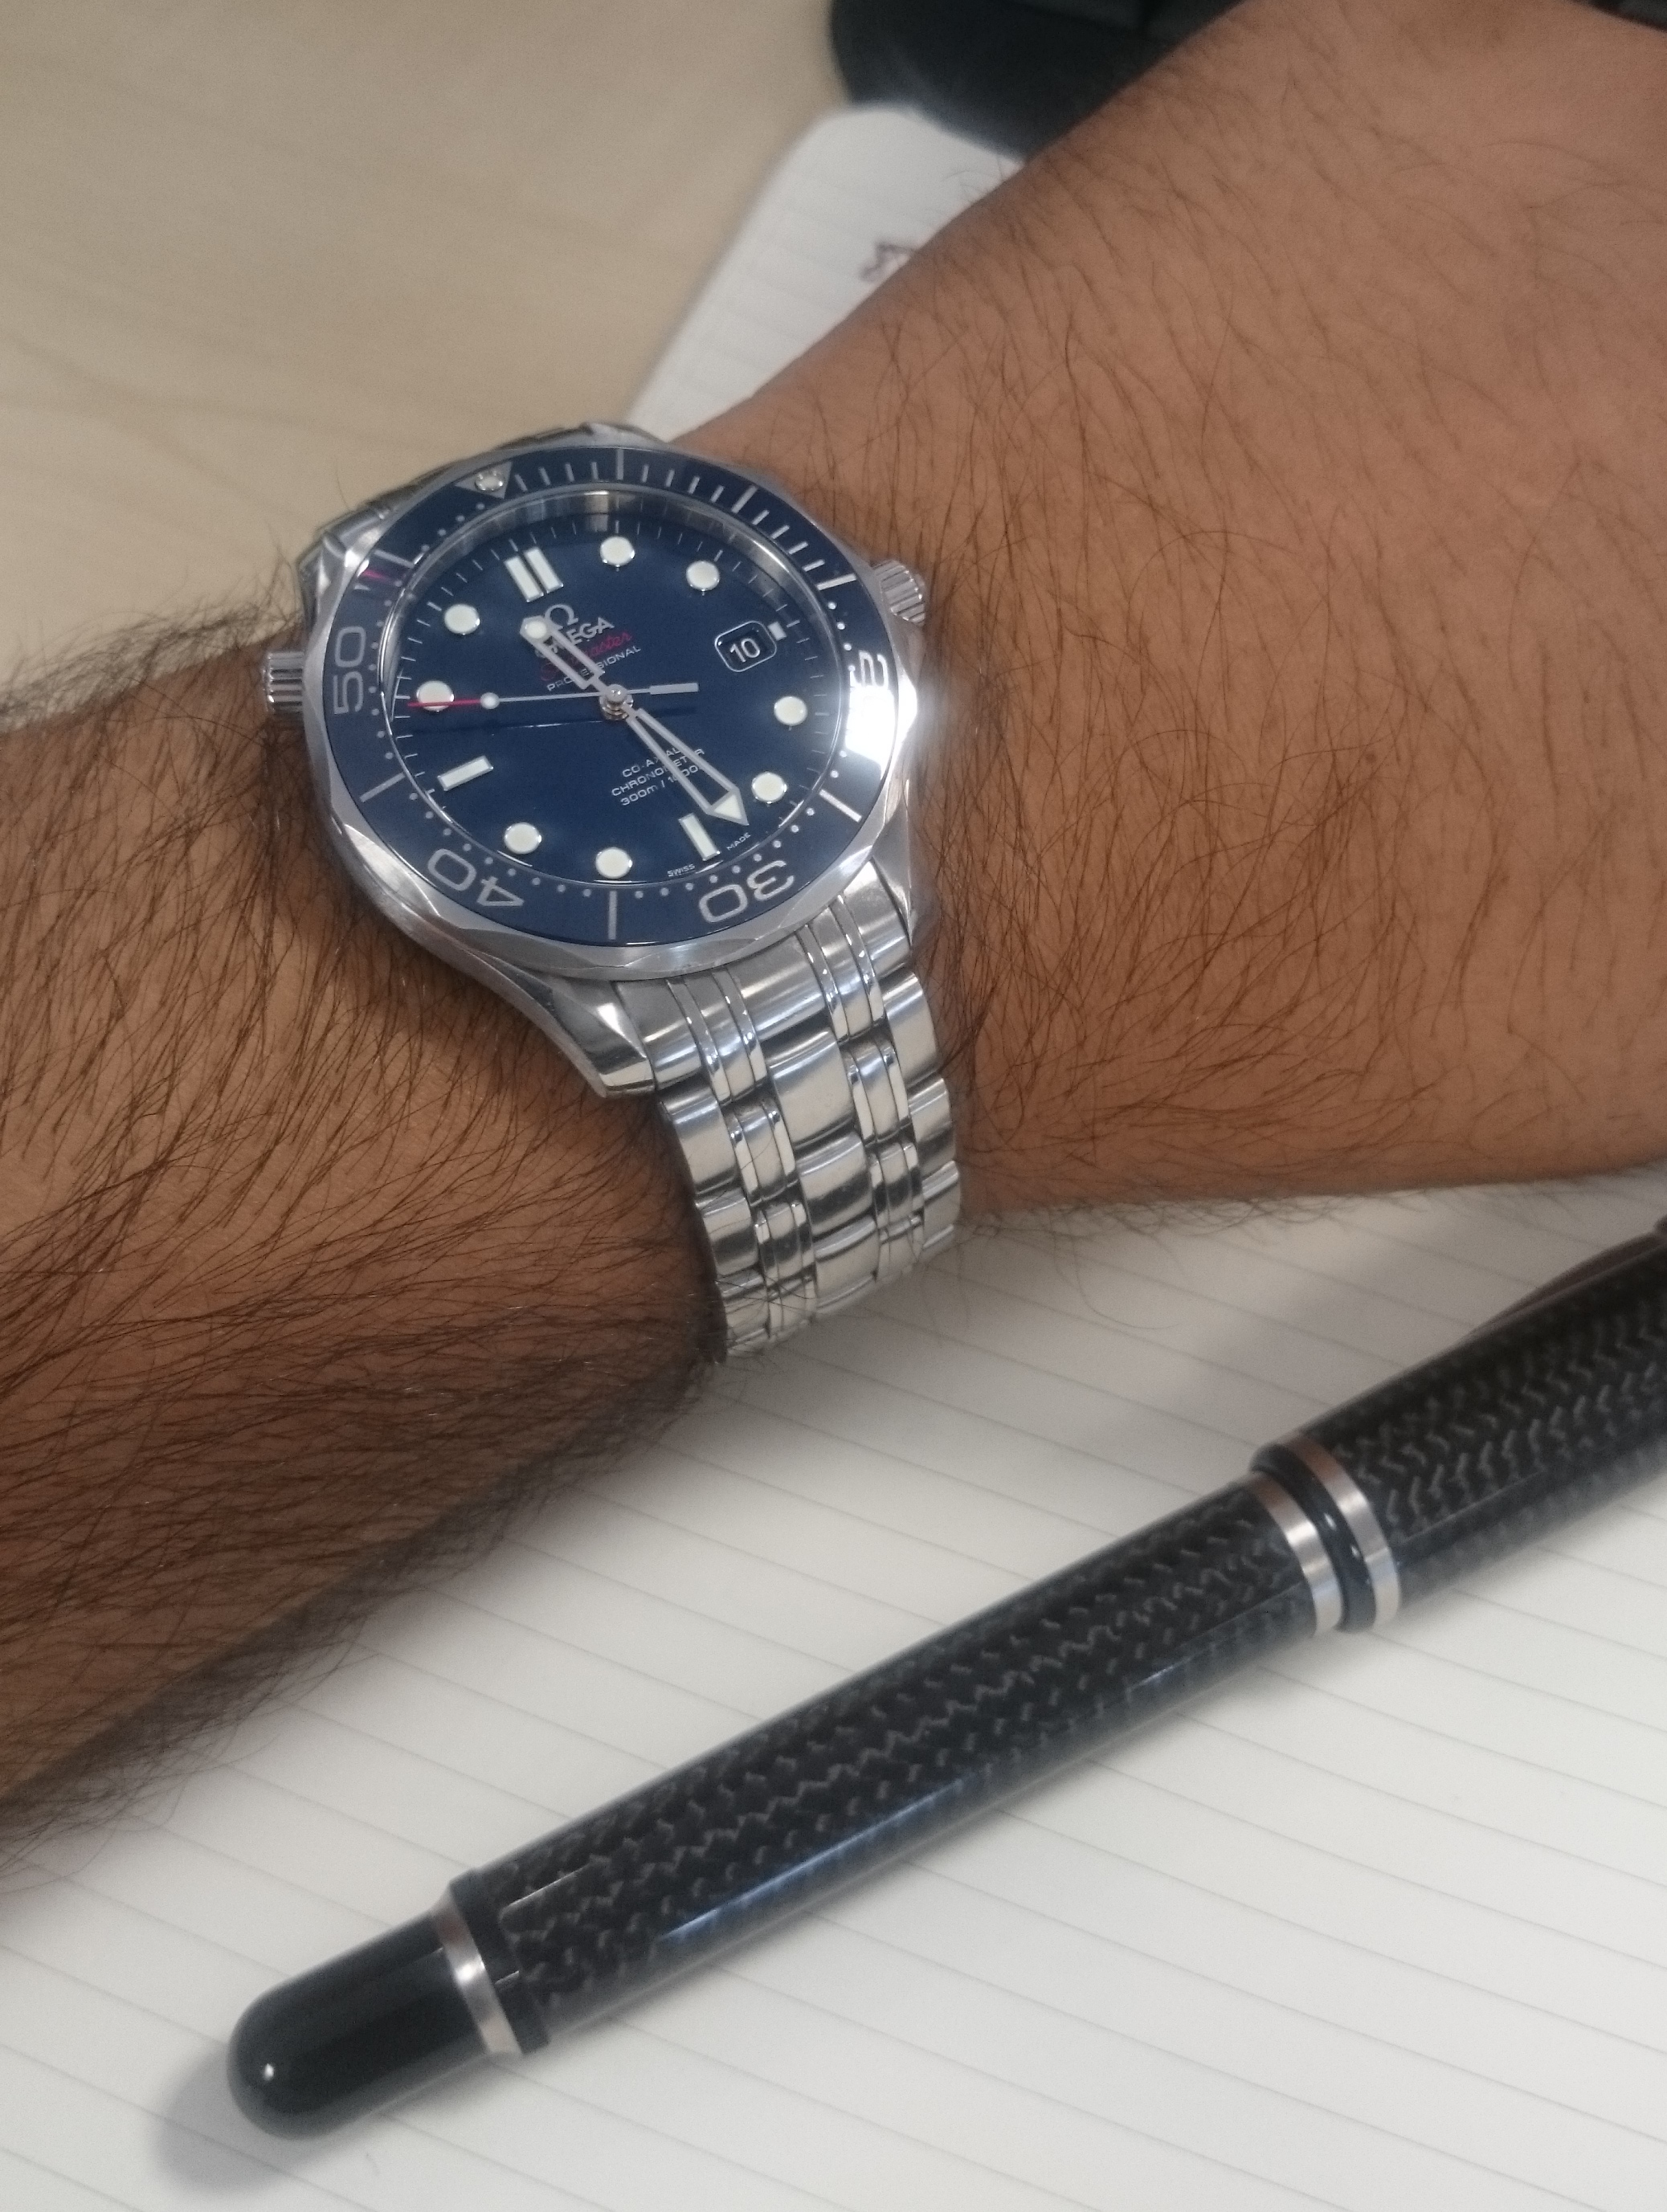 Omega Seamaster 300m - Discounts / Best Deals - Page 1 - Watches - PistonHeads